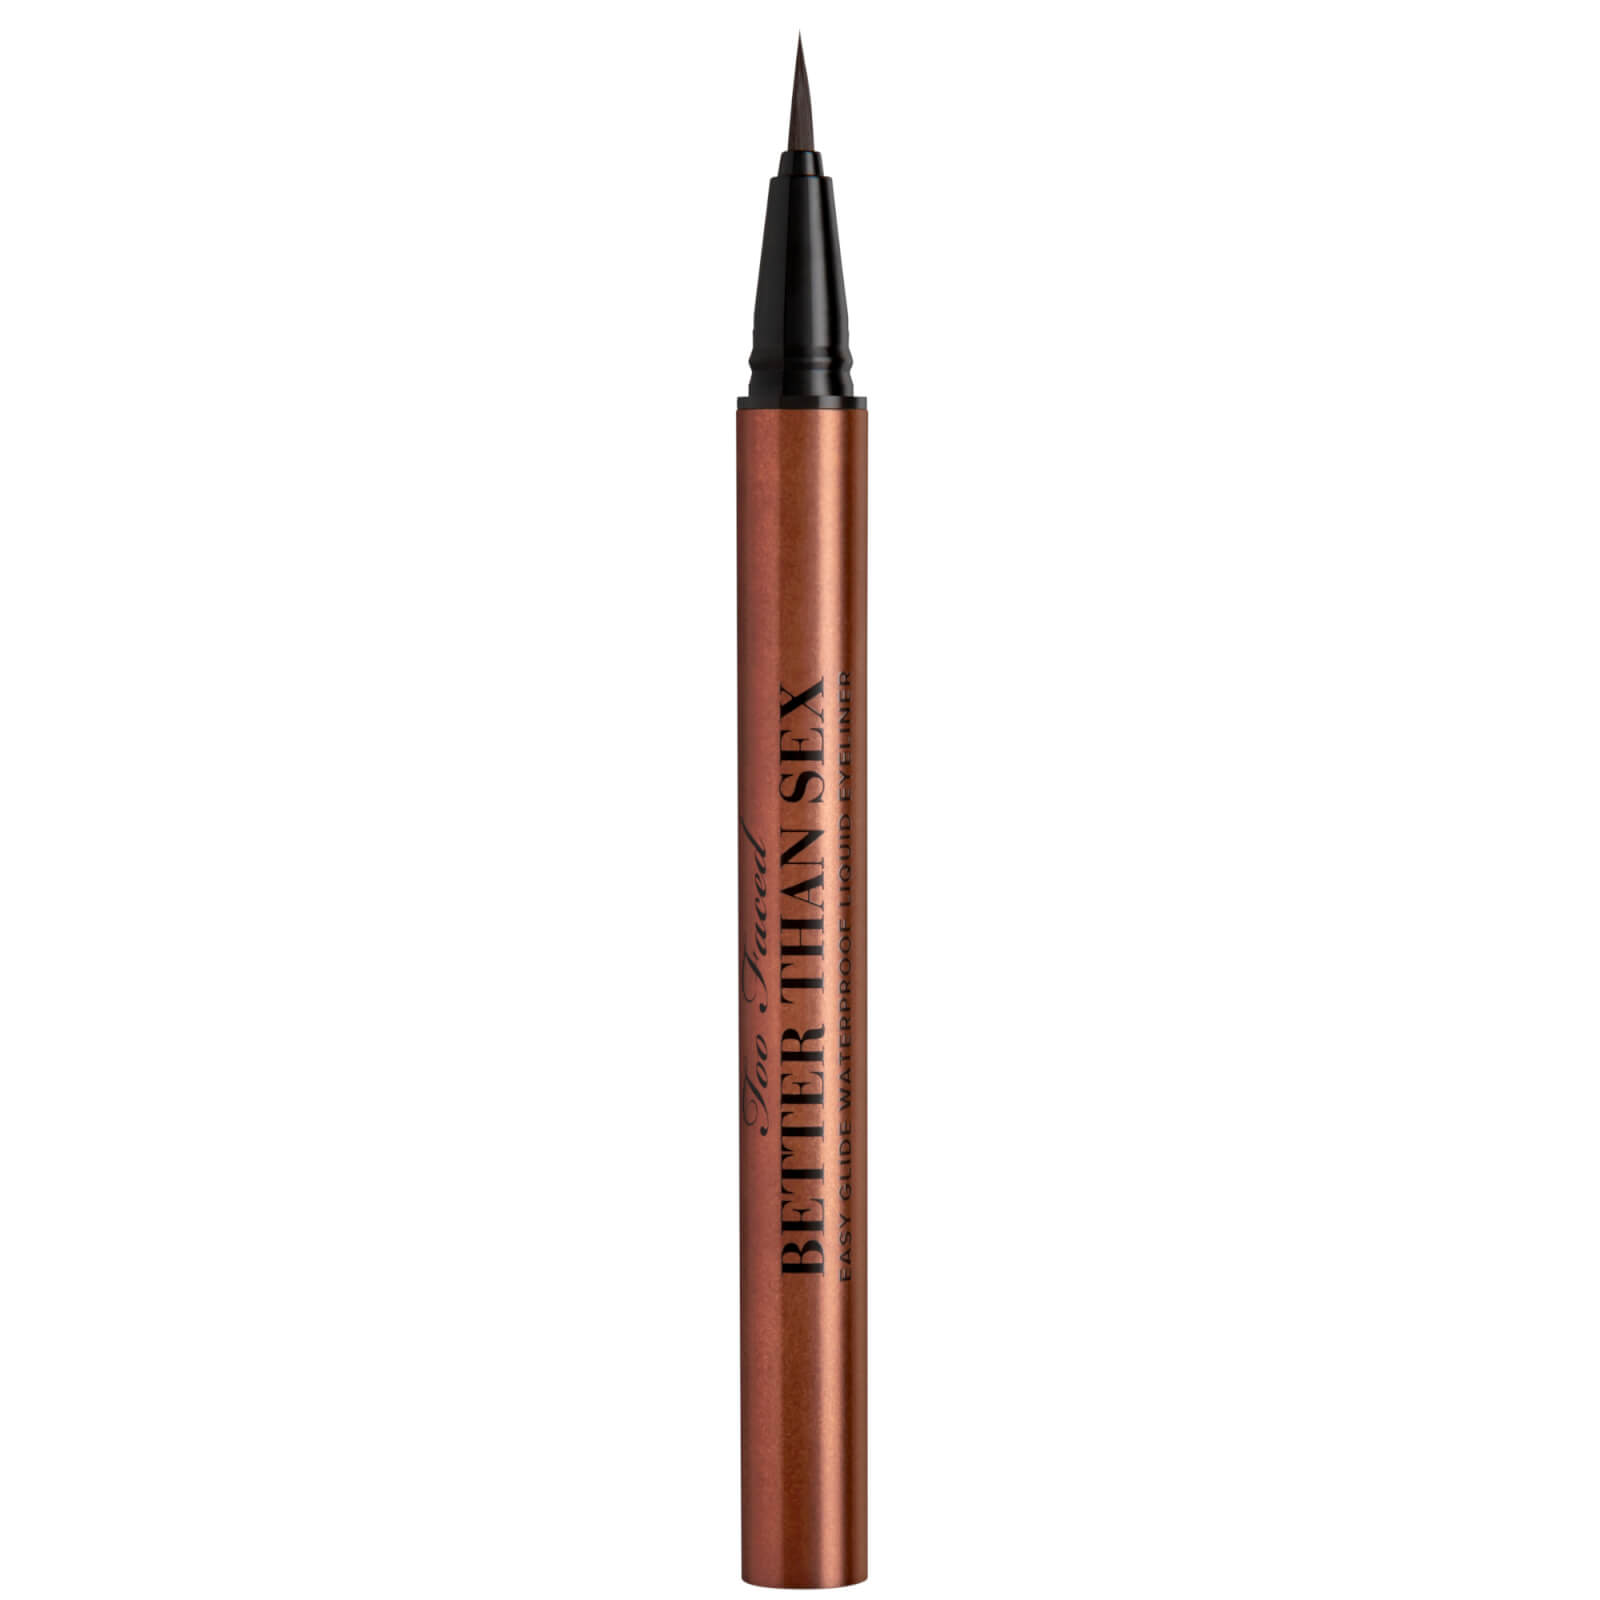 Too Faced Better Than Sex Easy Glide Waterproof Liquid Eyeliner 0.6ml (Various Shades) - Chocolate